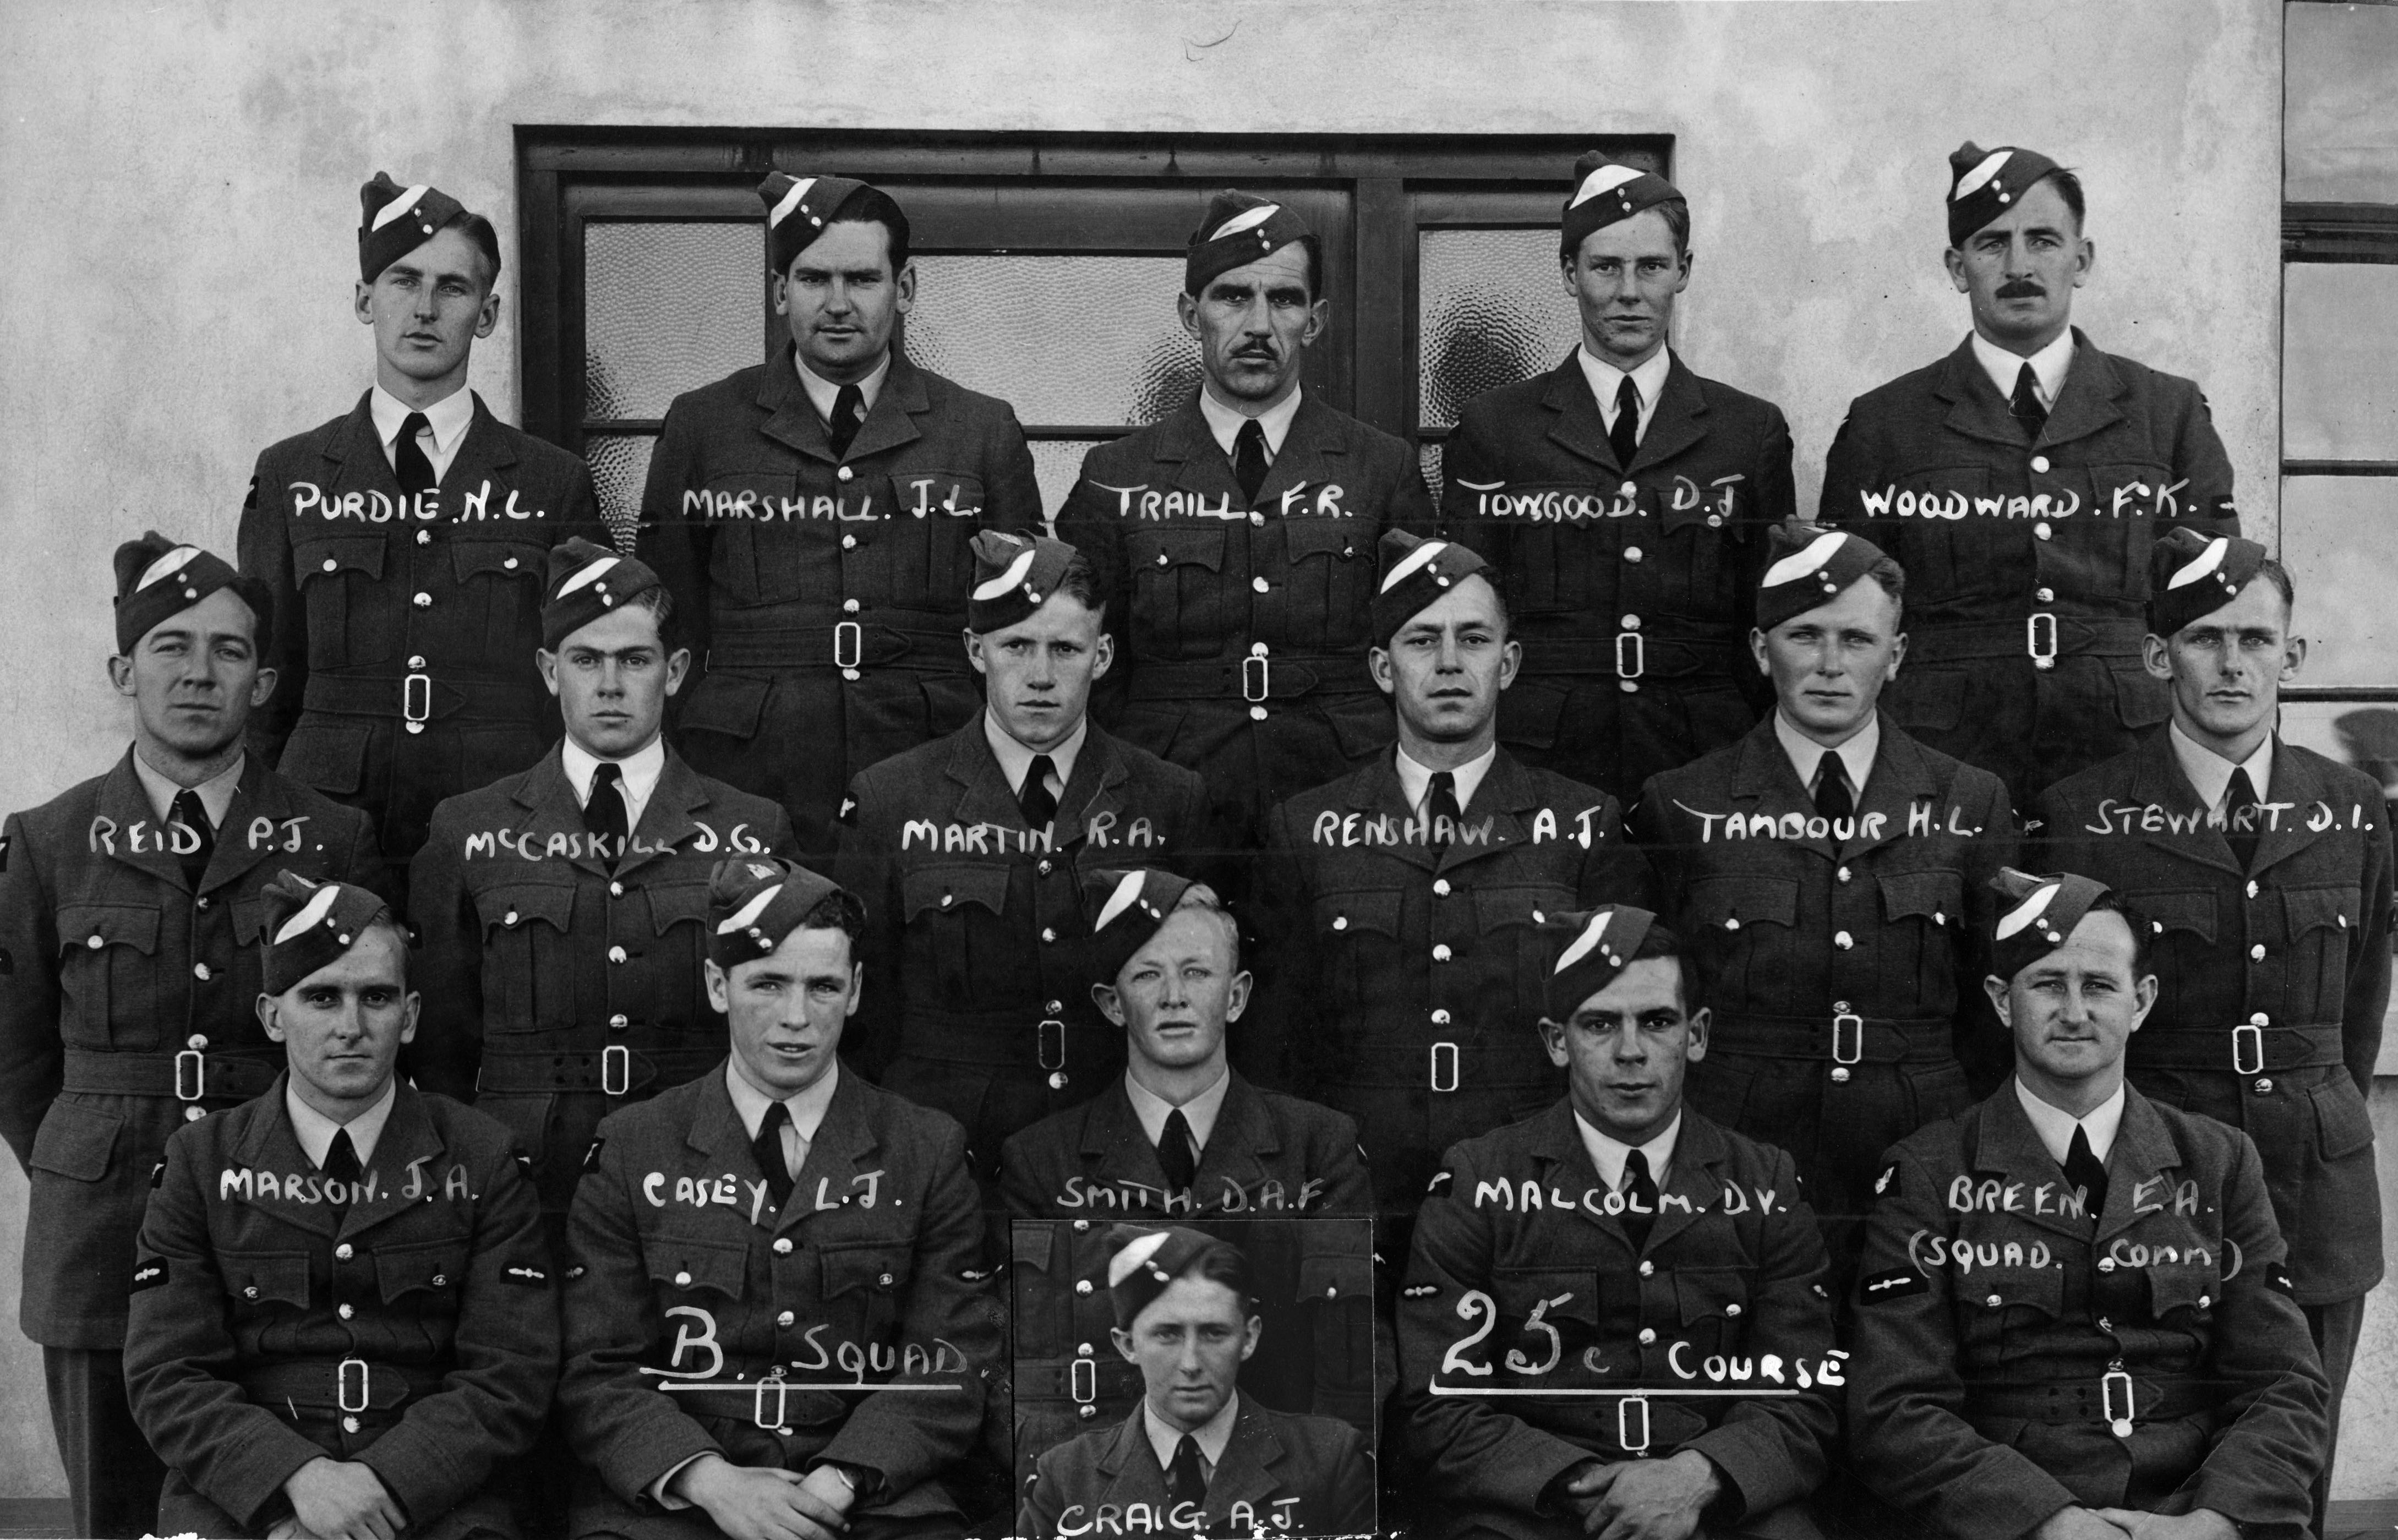 Tambour continued his training at 3 SFTS, RNZAF Station Ohakea. The photo shows the ‘B’ Squadron of Course No. 25C in February or March 1942. In the back row are (left to right): N.L. Purdie, J.L. Marshall, F.R. Traill, D.J. Towgood, F.K. Woodward; In the middle row: P.J. Reid, D.G. McCaskill, R.A. Martin, A.J. Renshaw, H.L. Tambour, D.I. Stewart; and in the front row: J.A. Marson, L.J. Casey, D.A.F. Smith, D.V. Malcolm, E.A. Breen. Inserted in the photo is A.J. Craig. Several of these airmen had trained at 4 EFTS as Tambour (Air Force Museum of New Zealand Photograph Collection).